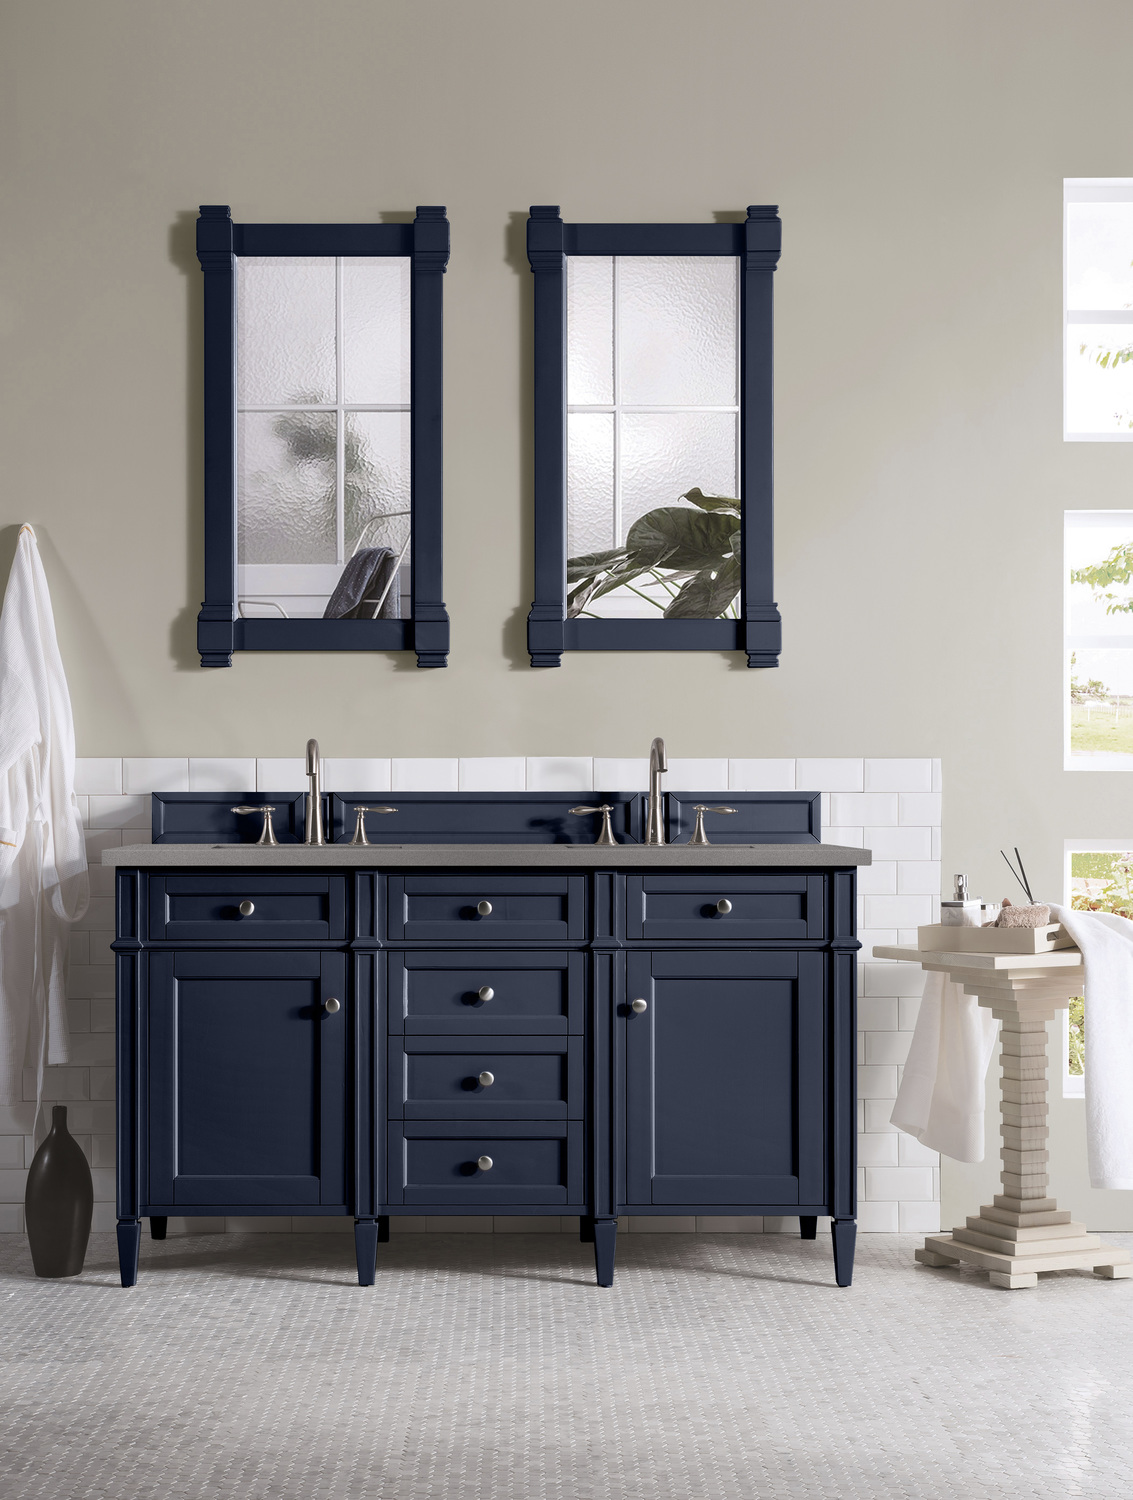 two vanities with cabinet in between James Martin Vanity Victory Blue Transitional